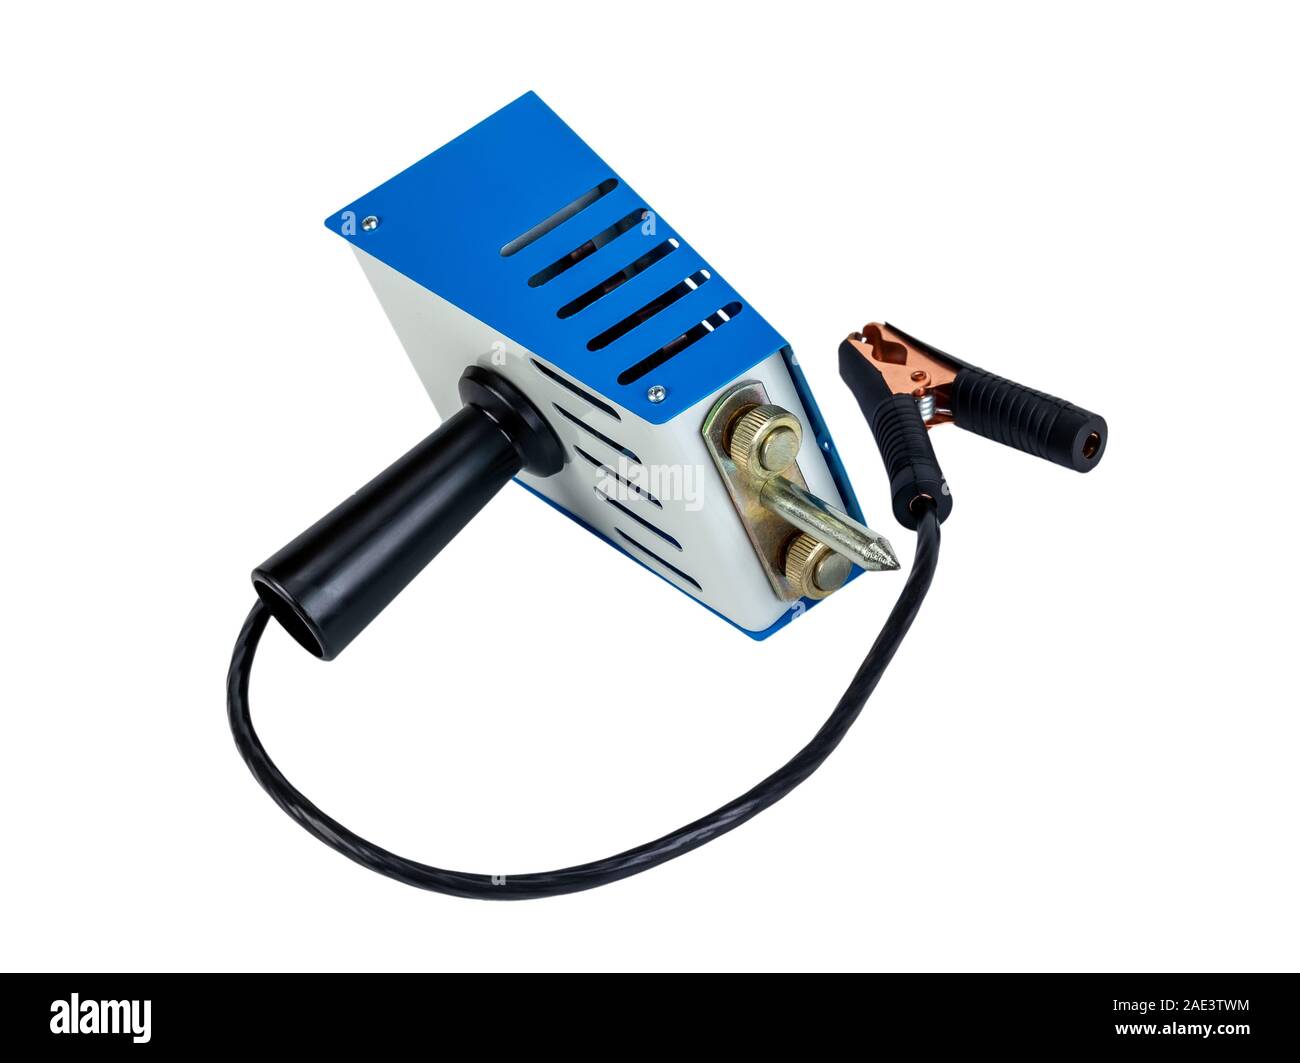 Analog car battery tester, power test load fork, isolated on a white background. Stock Photo